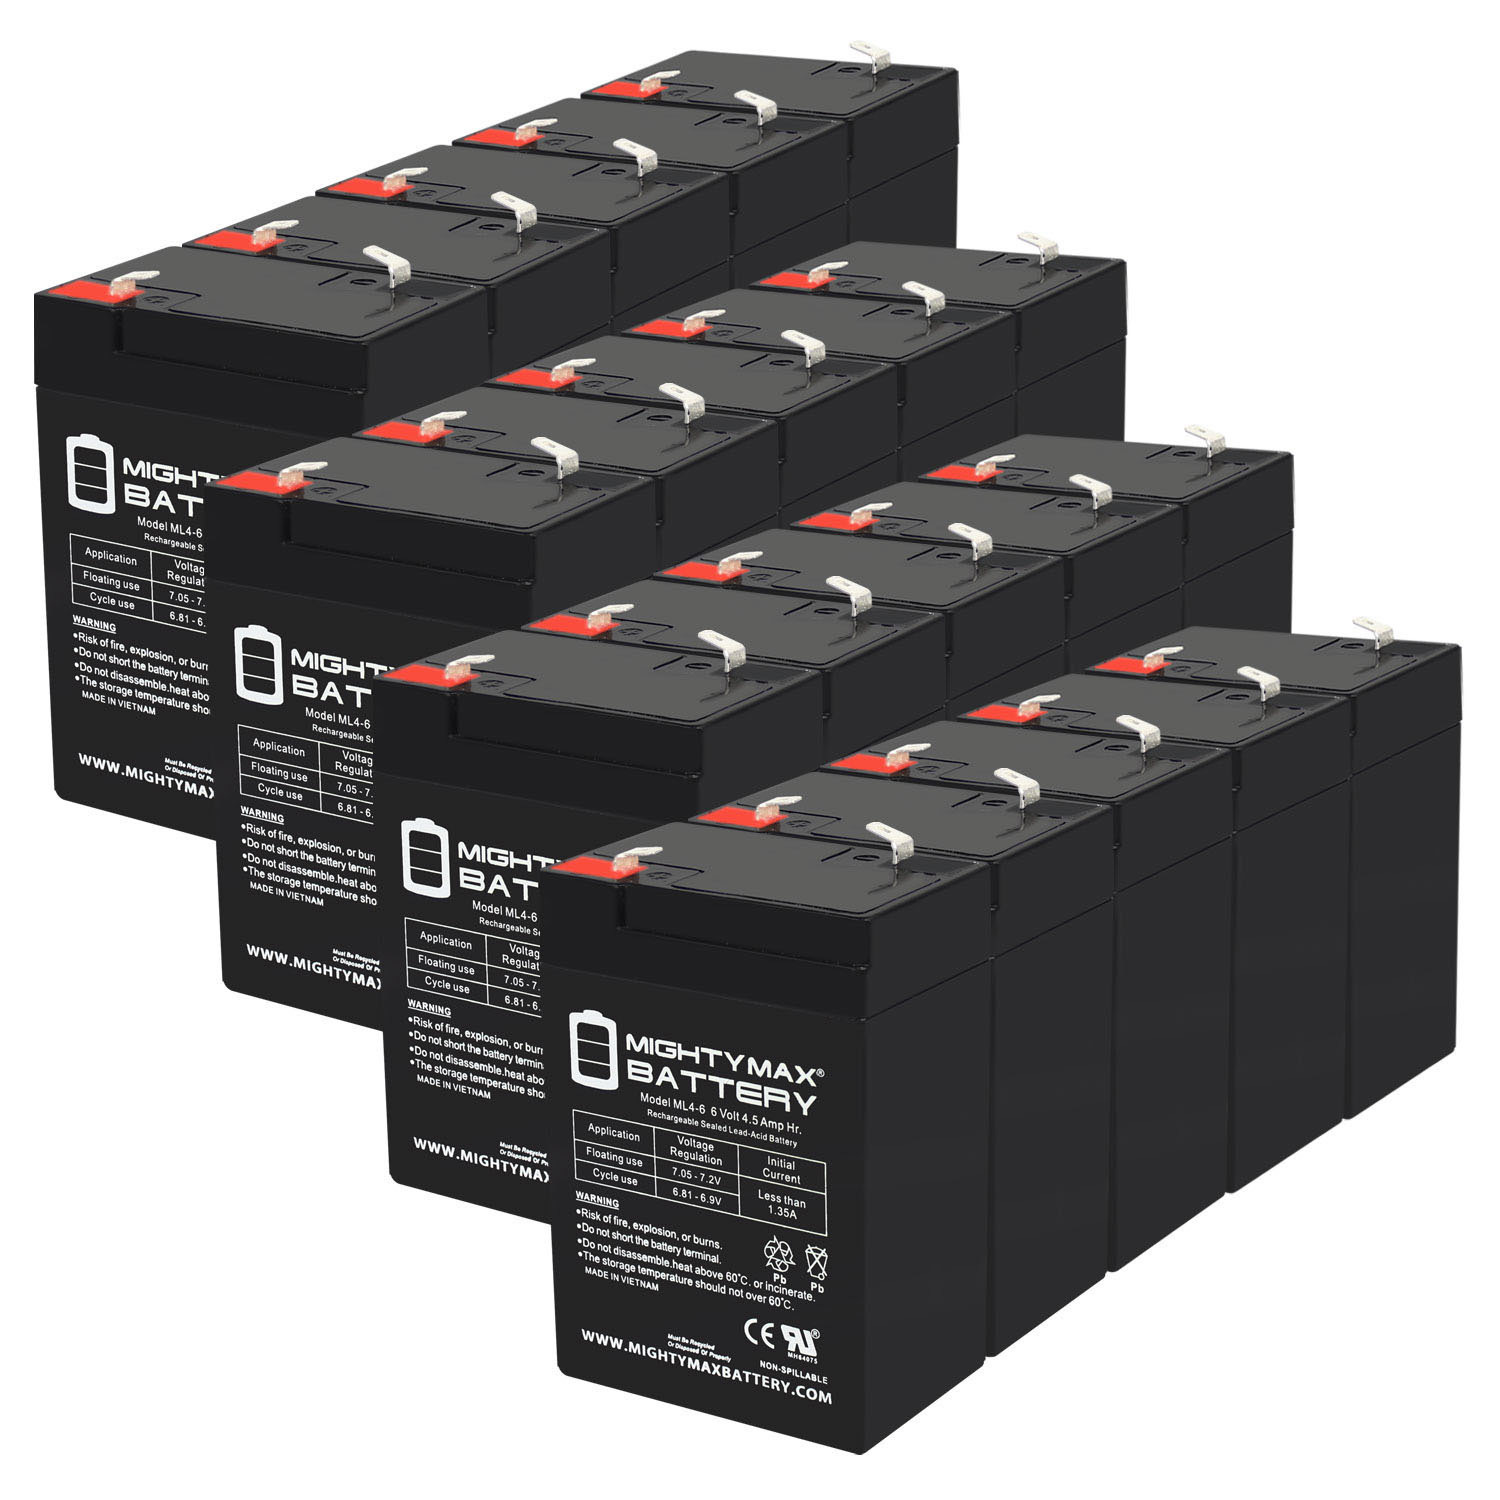 6V 4.5AH SLA Replacement Battery for Abbott Lab Life Care 1000 - 20 Pack